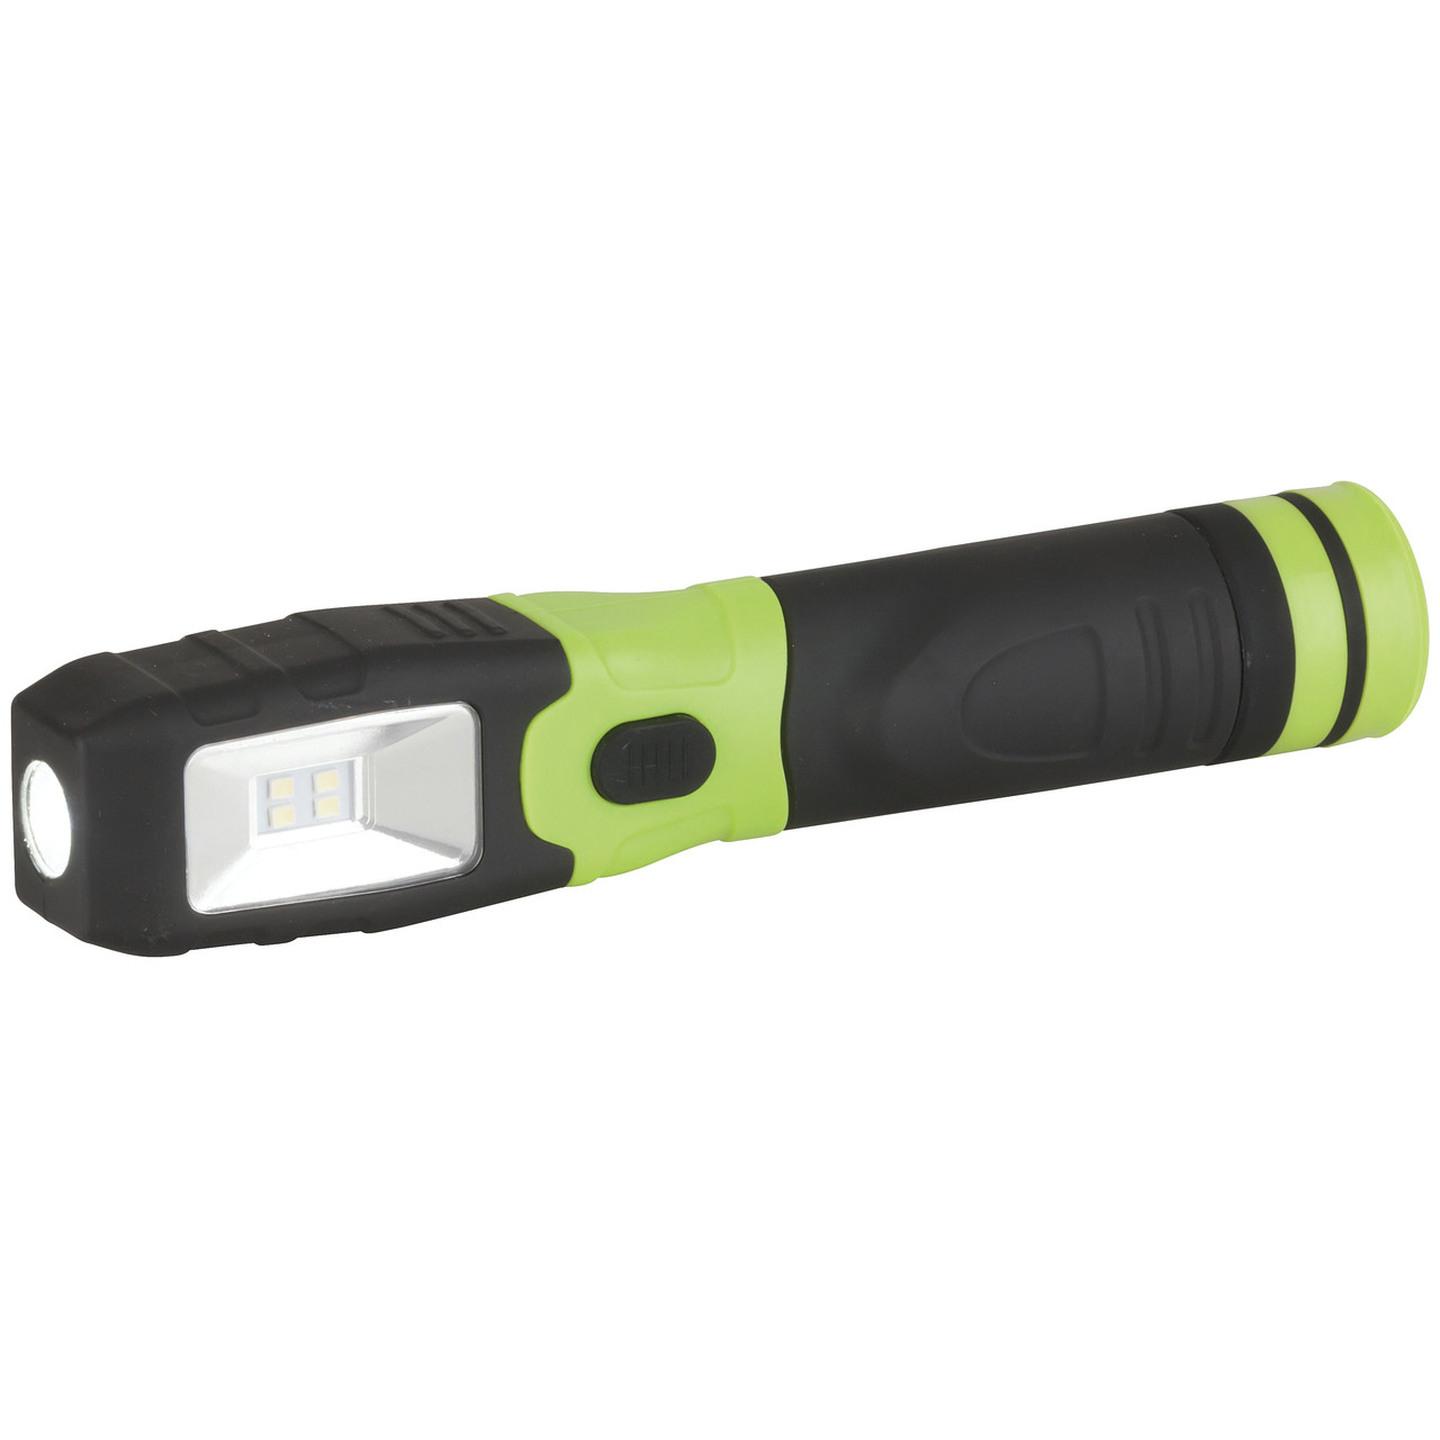 LED worklight and torch with power bank